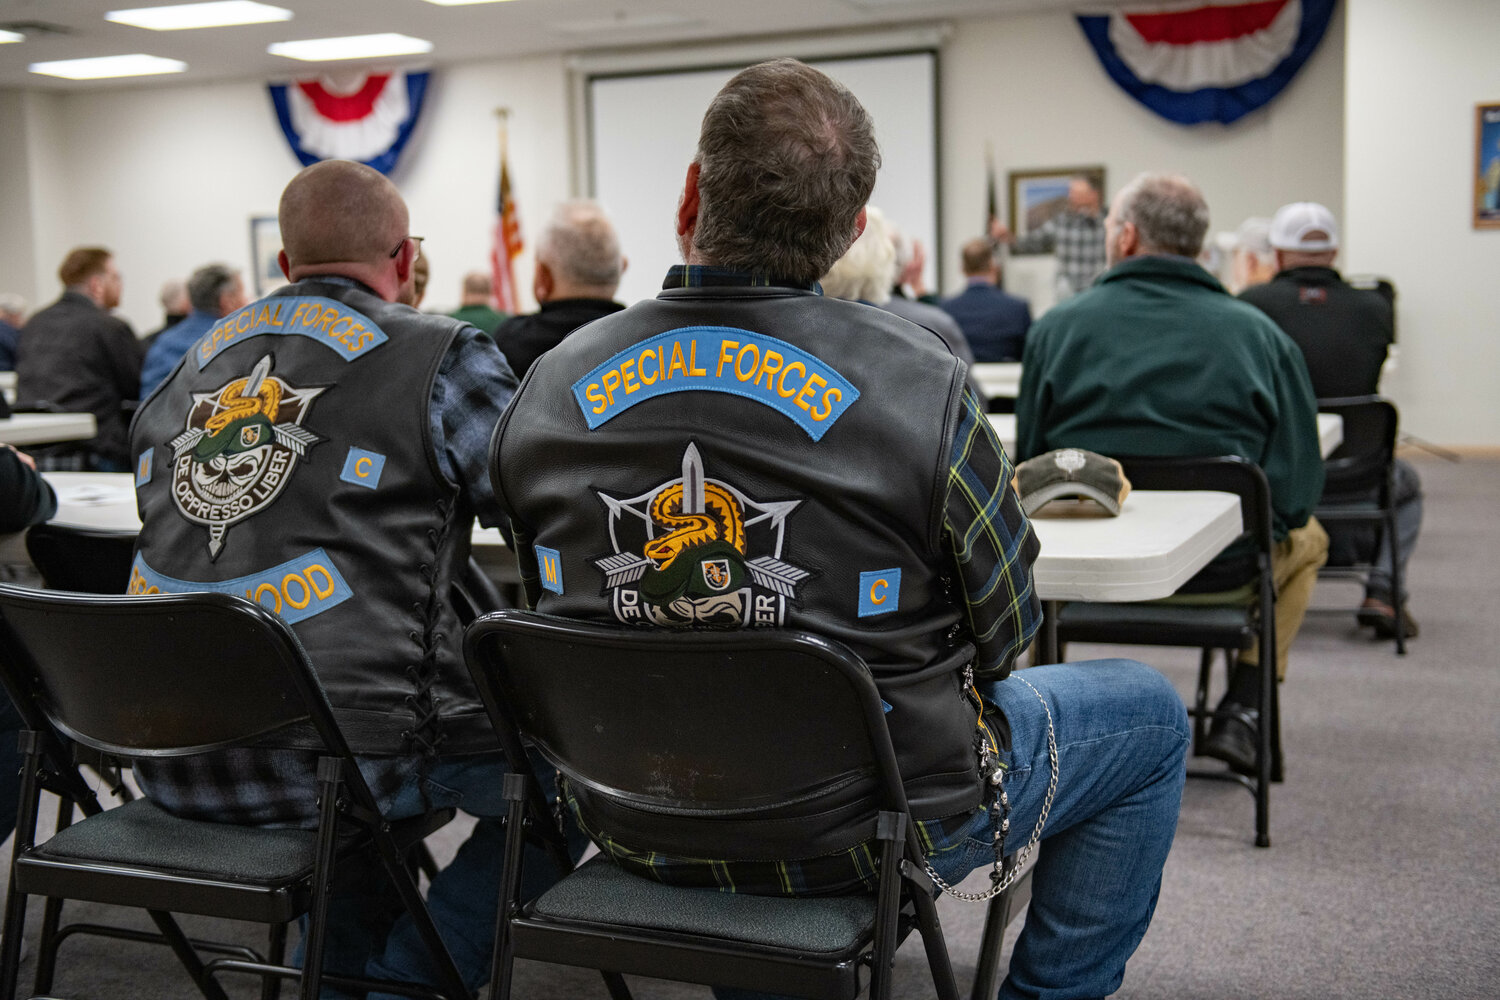 Attendees listen as Veteran Memorial Museum Director Chip Duncan gives an introductory speech during a ceremony honoring Medal of Honor recipient Franklin D. Miller at the Veterans Memorial Museum in Chehalis on Jan. 5.